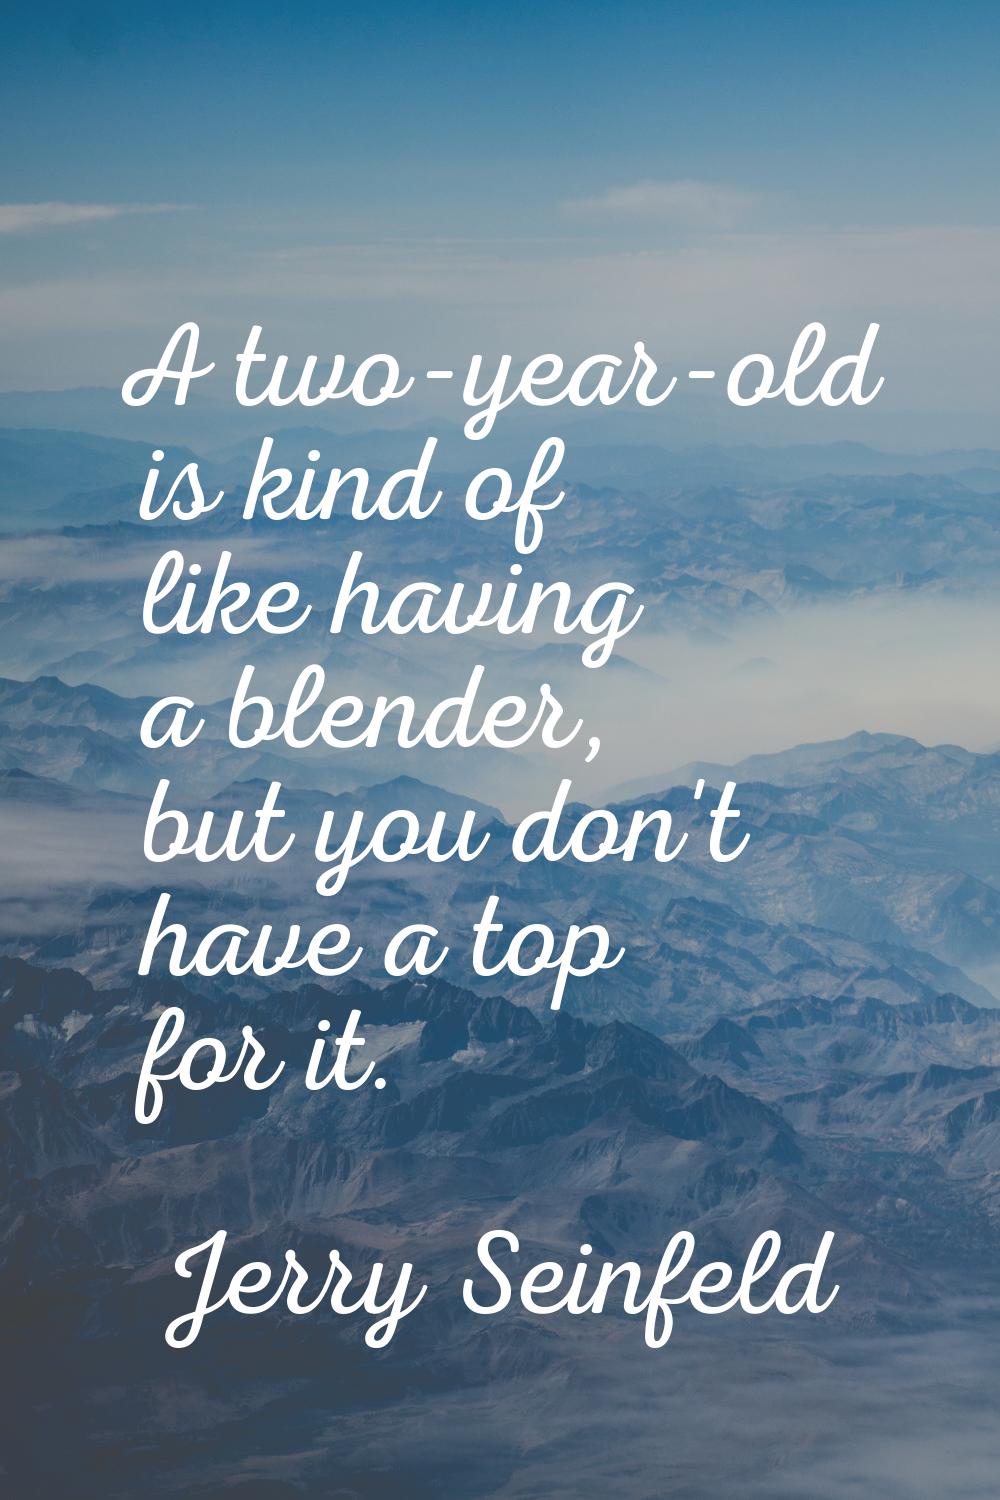 A two-year-old is kind of like having a blender, but you don't have a top for it.